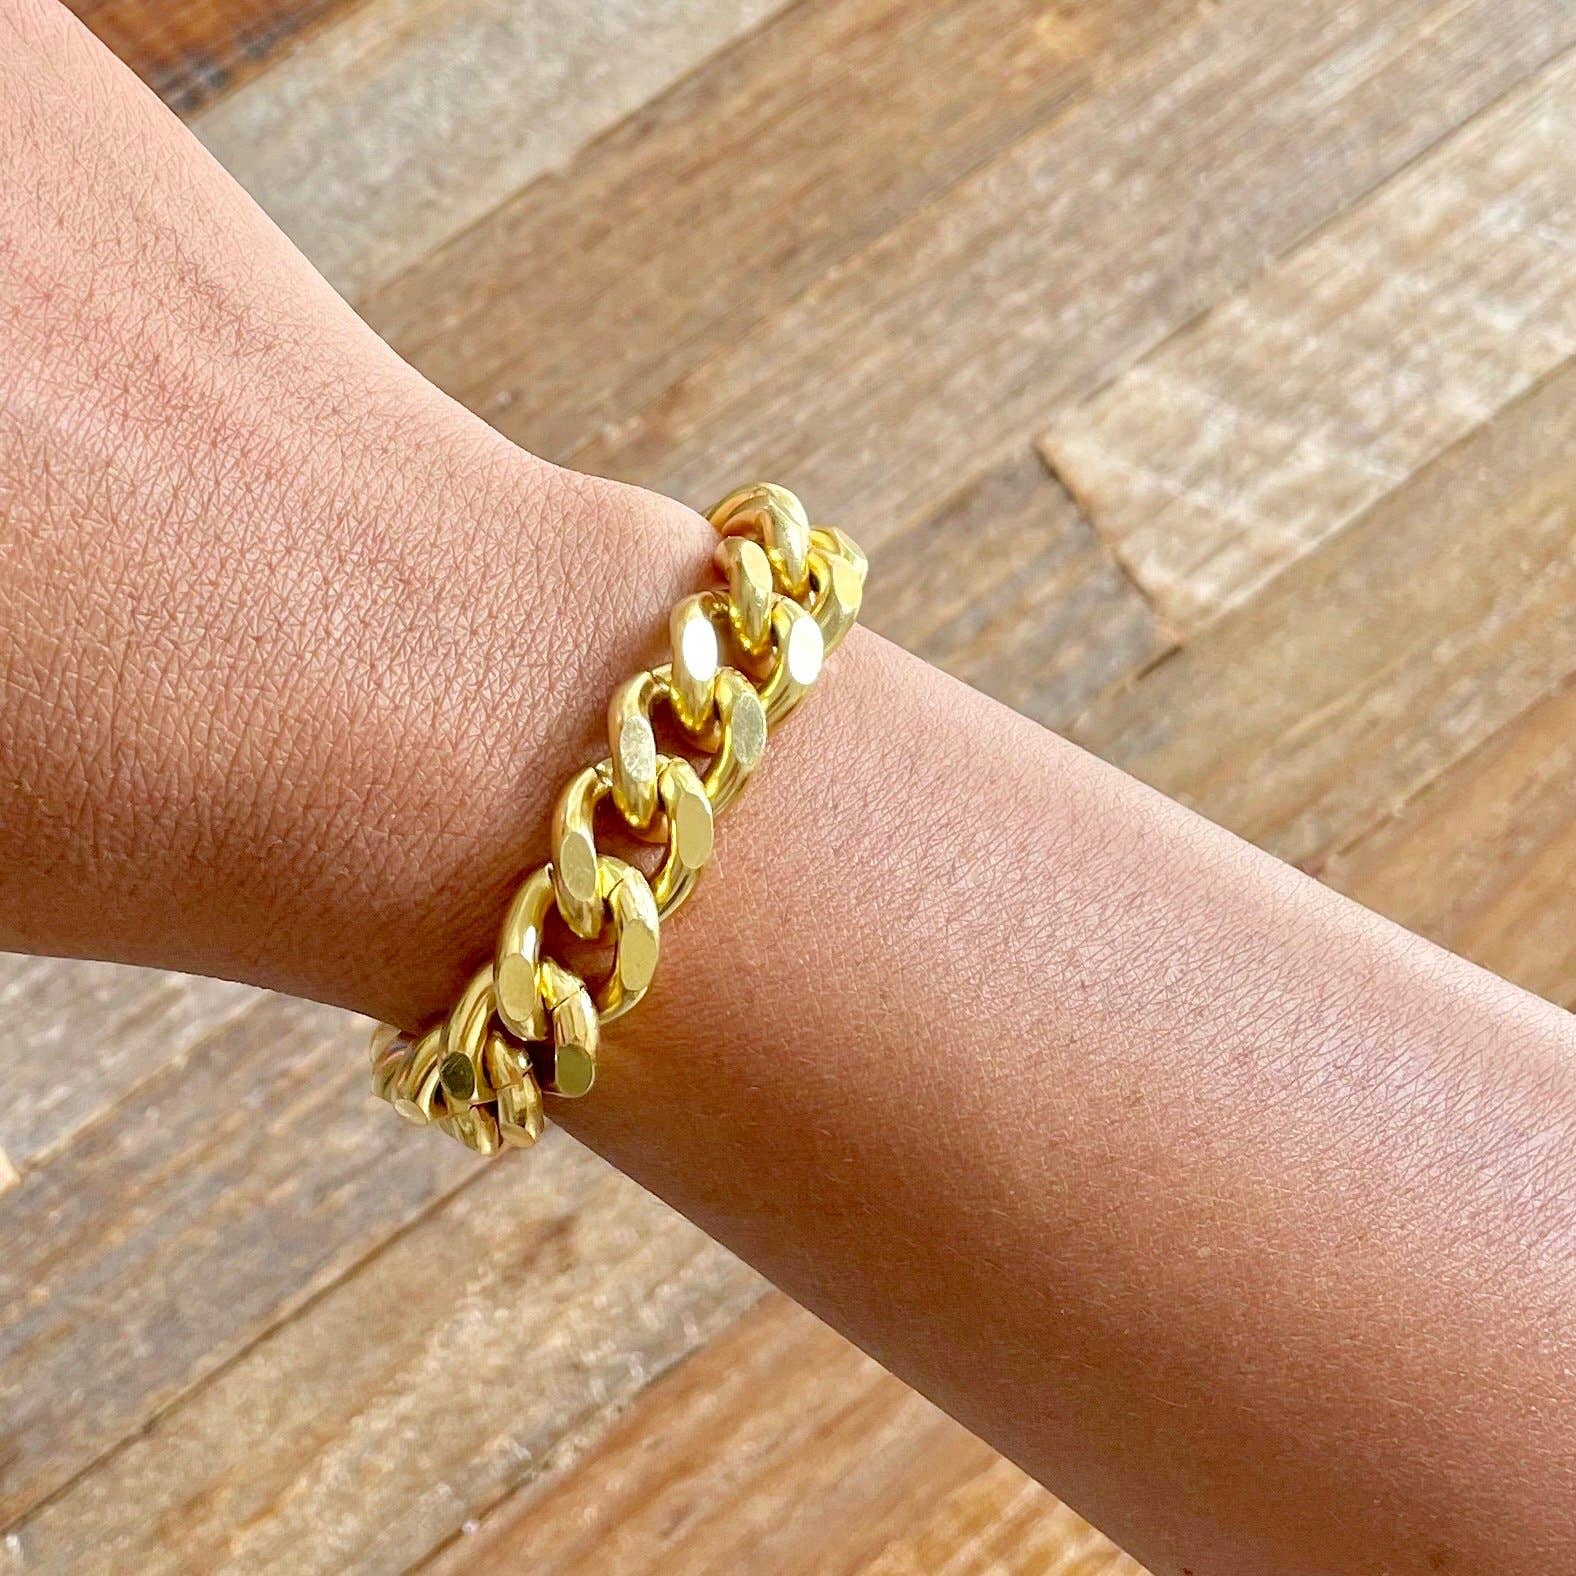 18k gold plated brass chain bracelet with one inch extender on a wrist